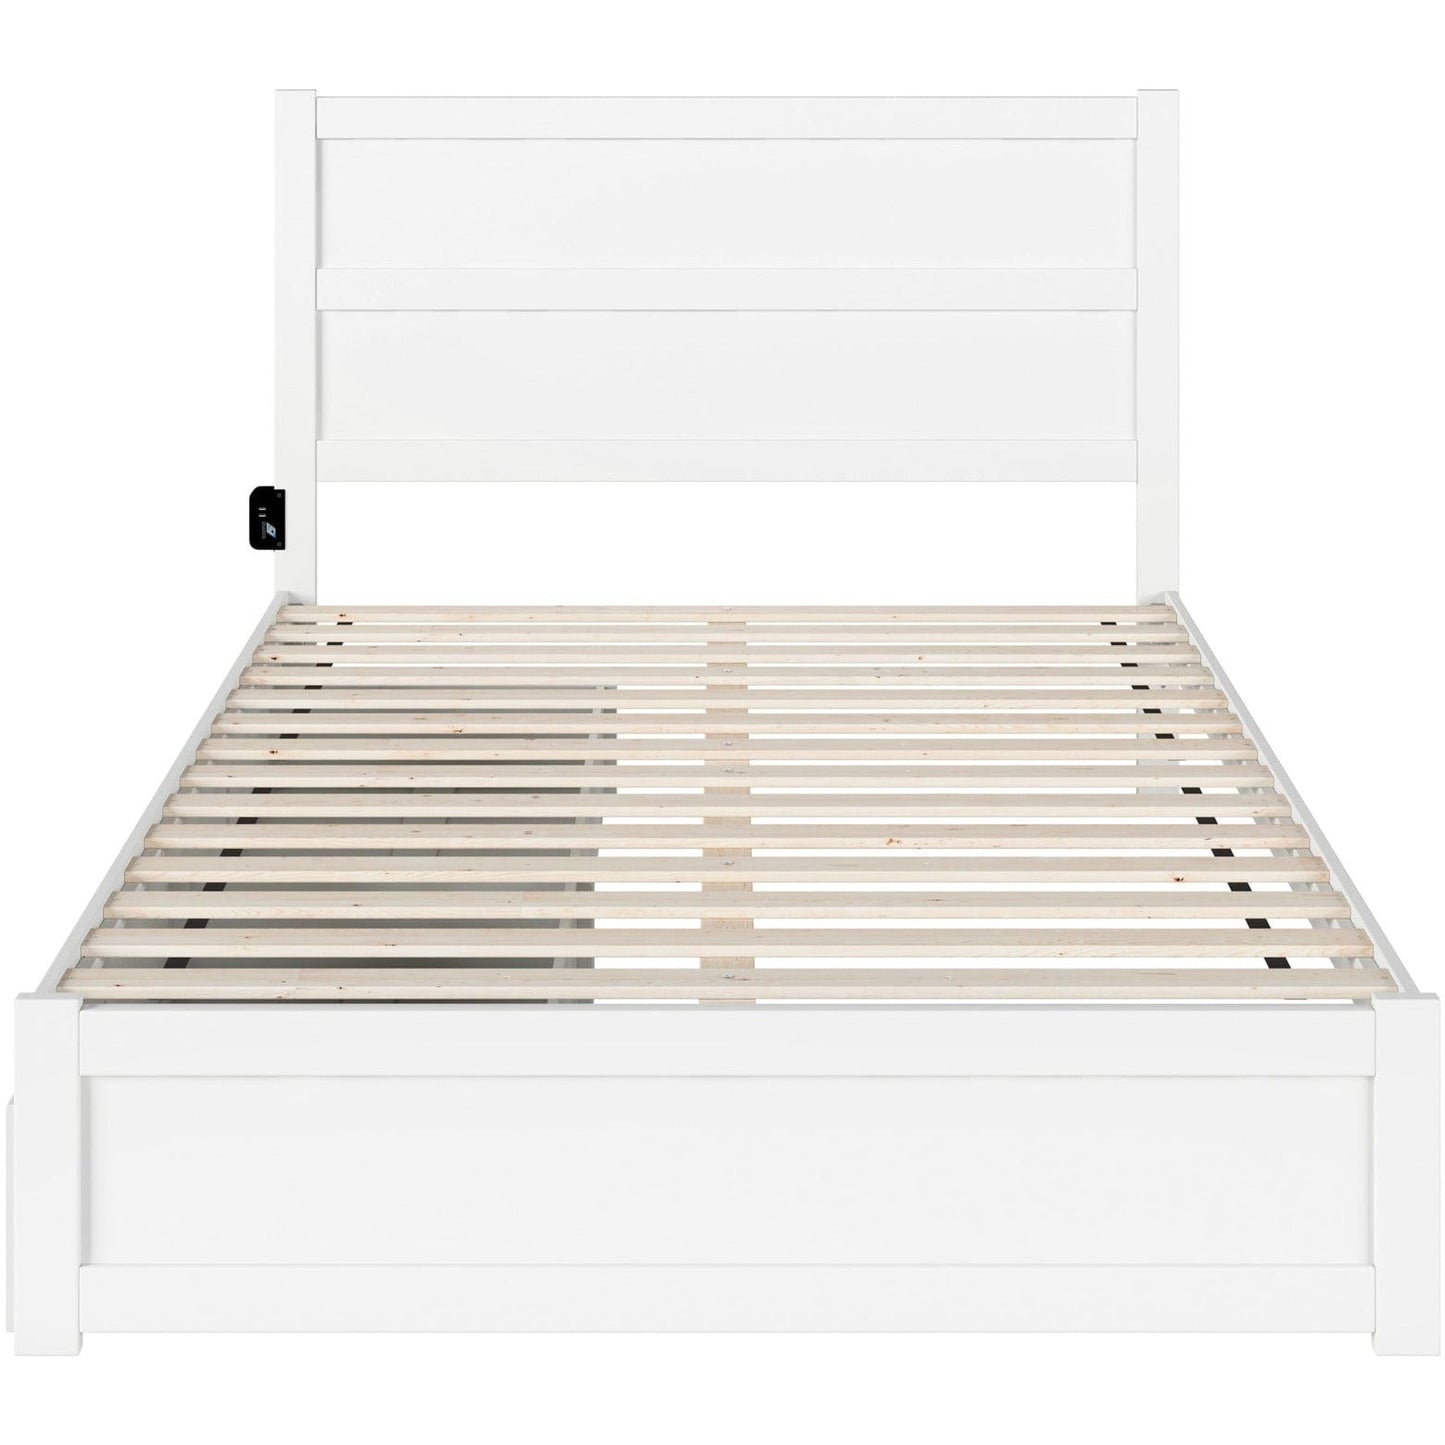 AFI Furnishings NoHo Queen Bed with Footboard and 2 Drawers in White AG9163442